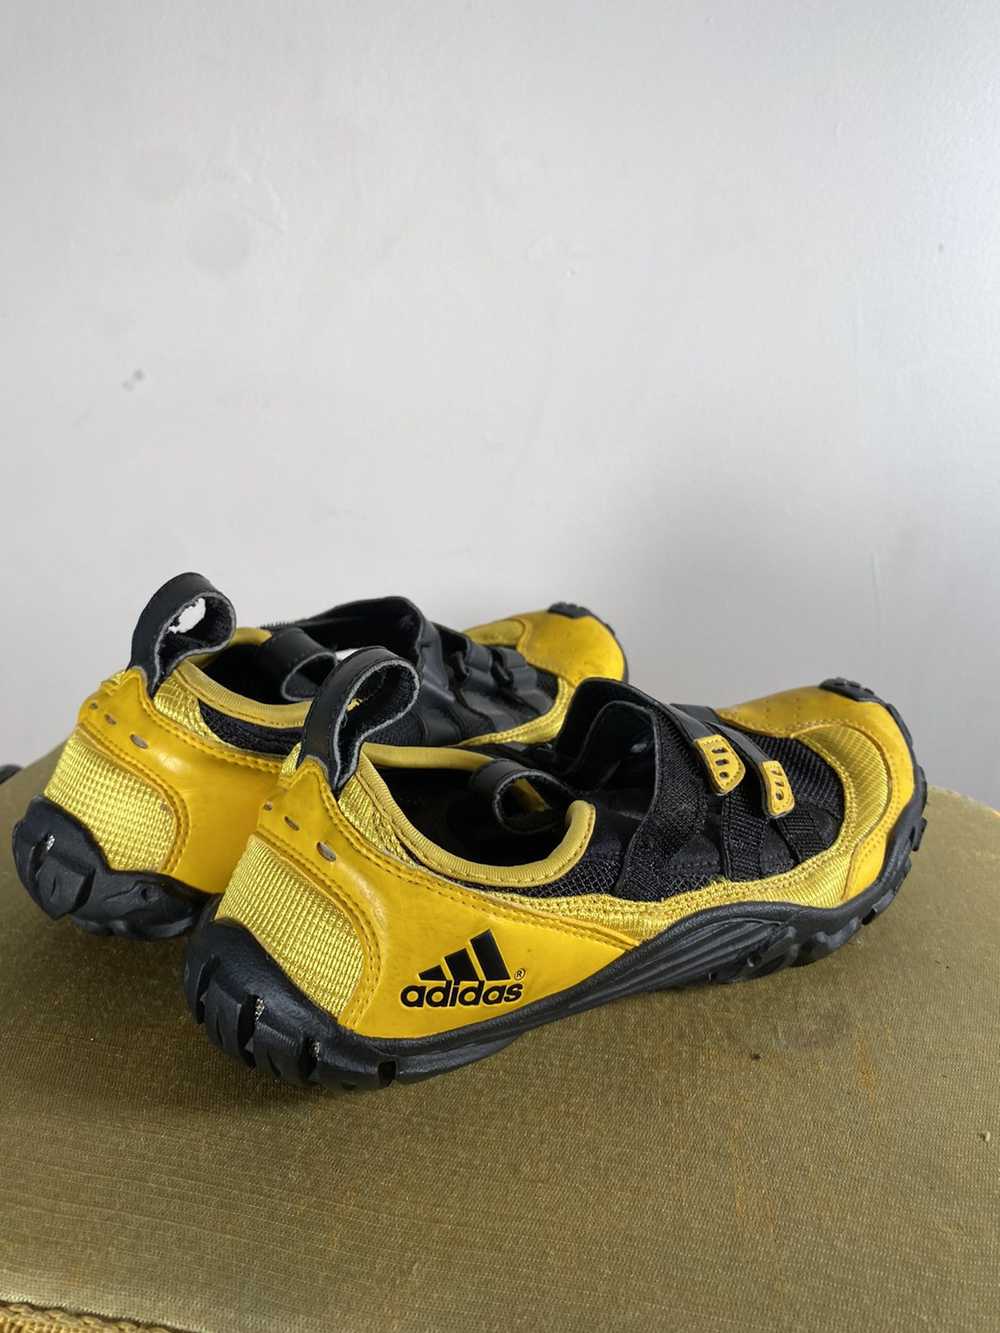 Vintage Velcro Water Shoes - image 7